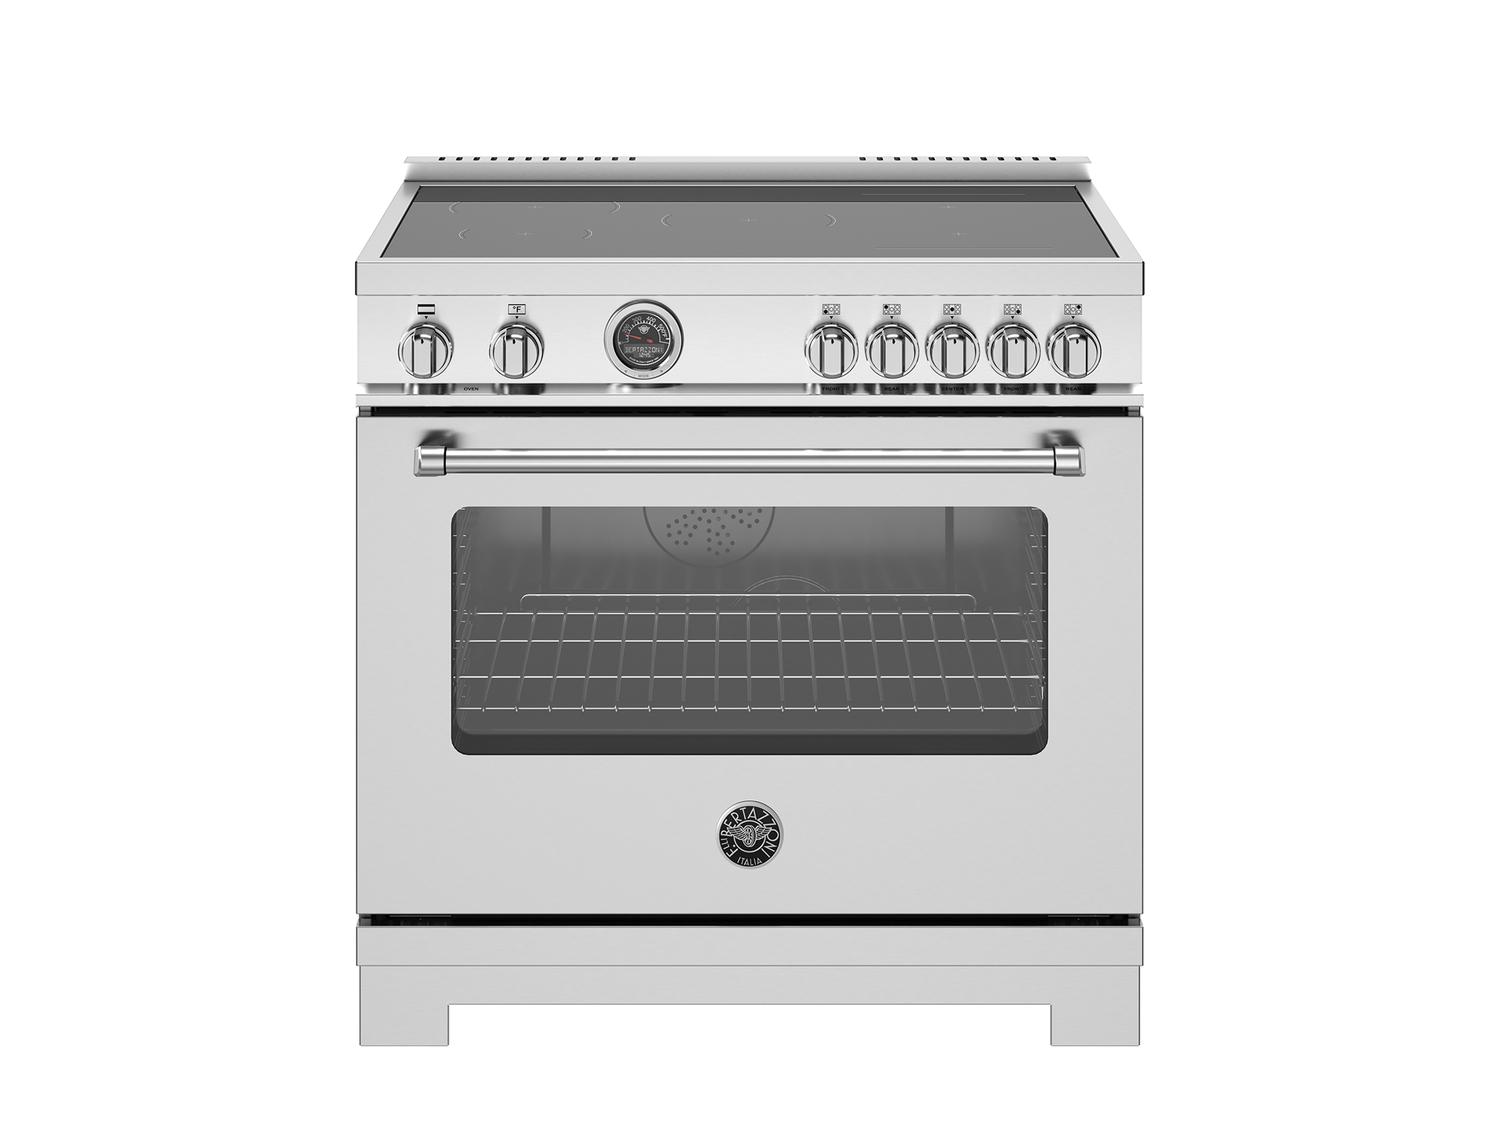 Bertazzoni MAS365ICFEPXT 36 Inch Induction Range, 5 Heating Zones And Cast Iron Griddle, Electric Self-Clean Oven Stainless Steel